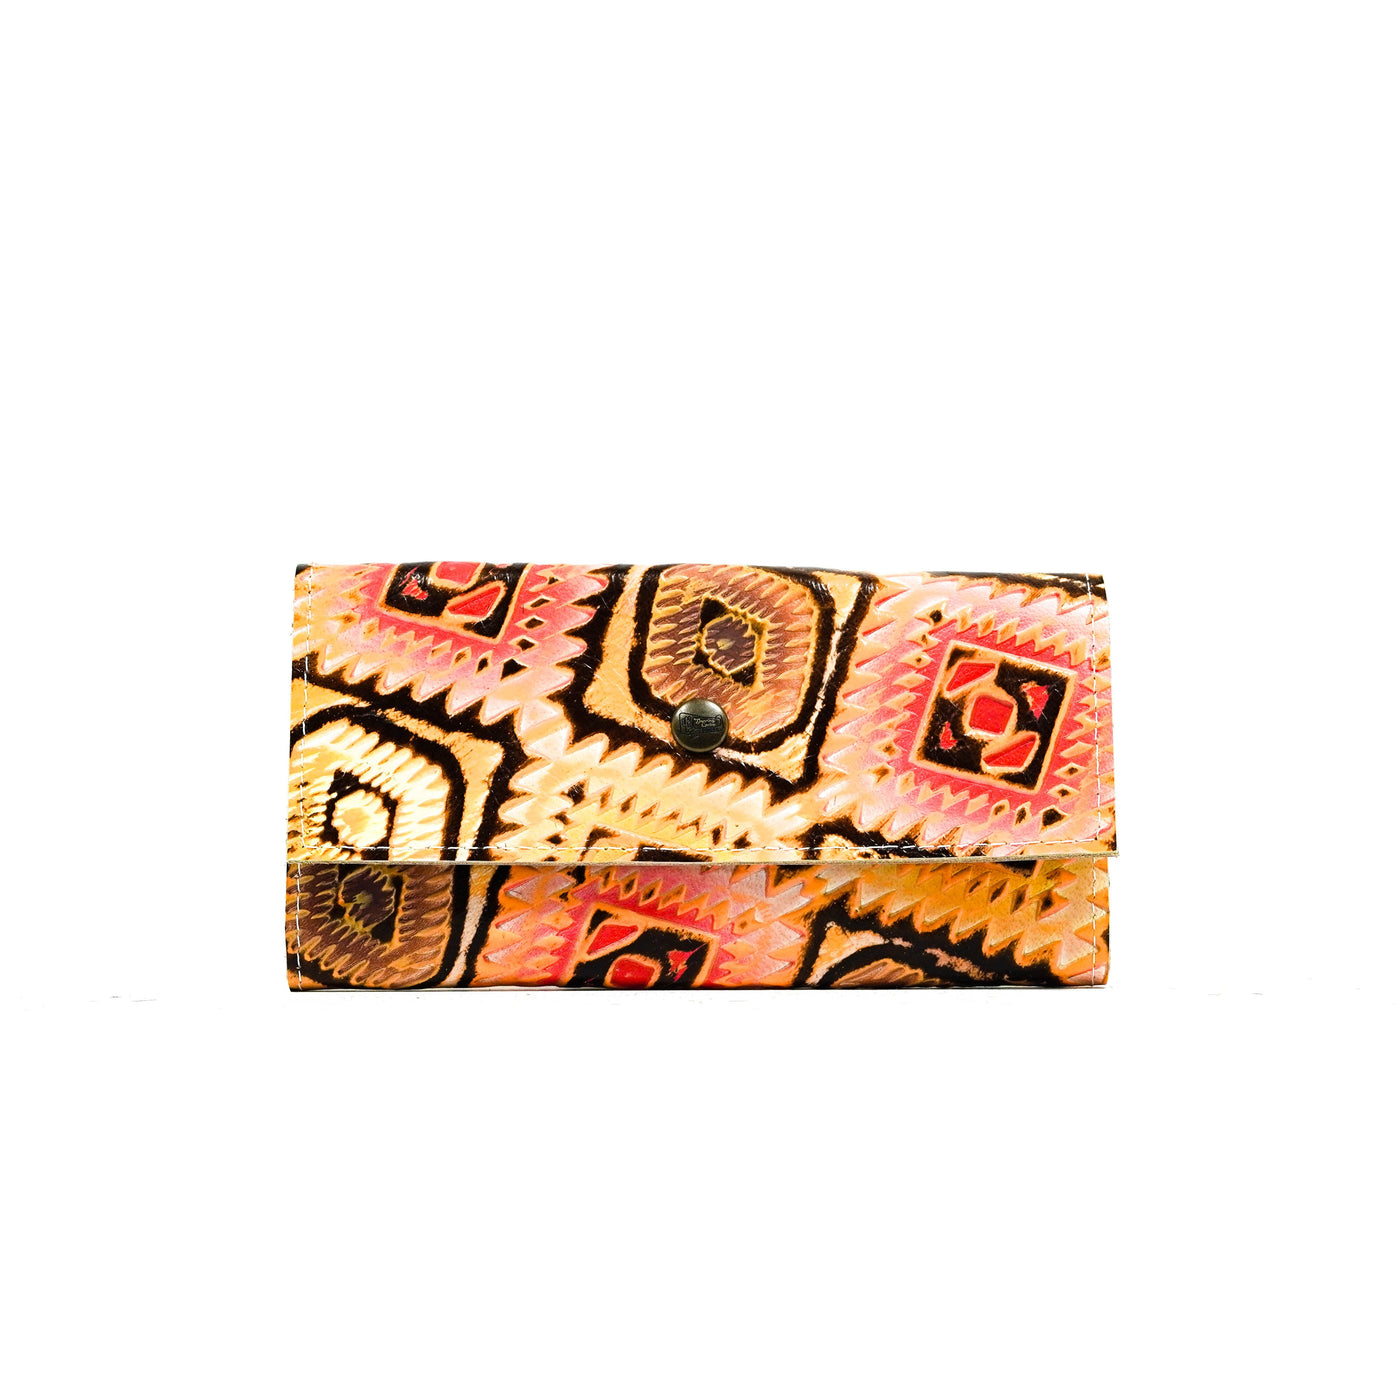 Kacey Wallet - All Embossed w/ Moab Aztec-Kacey Wallet-Western-Cowhide-Bags-Handmade-Products-Gifts-Dancing Cactus Designs